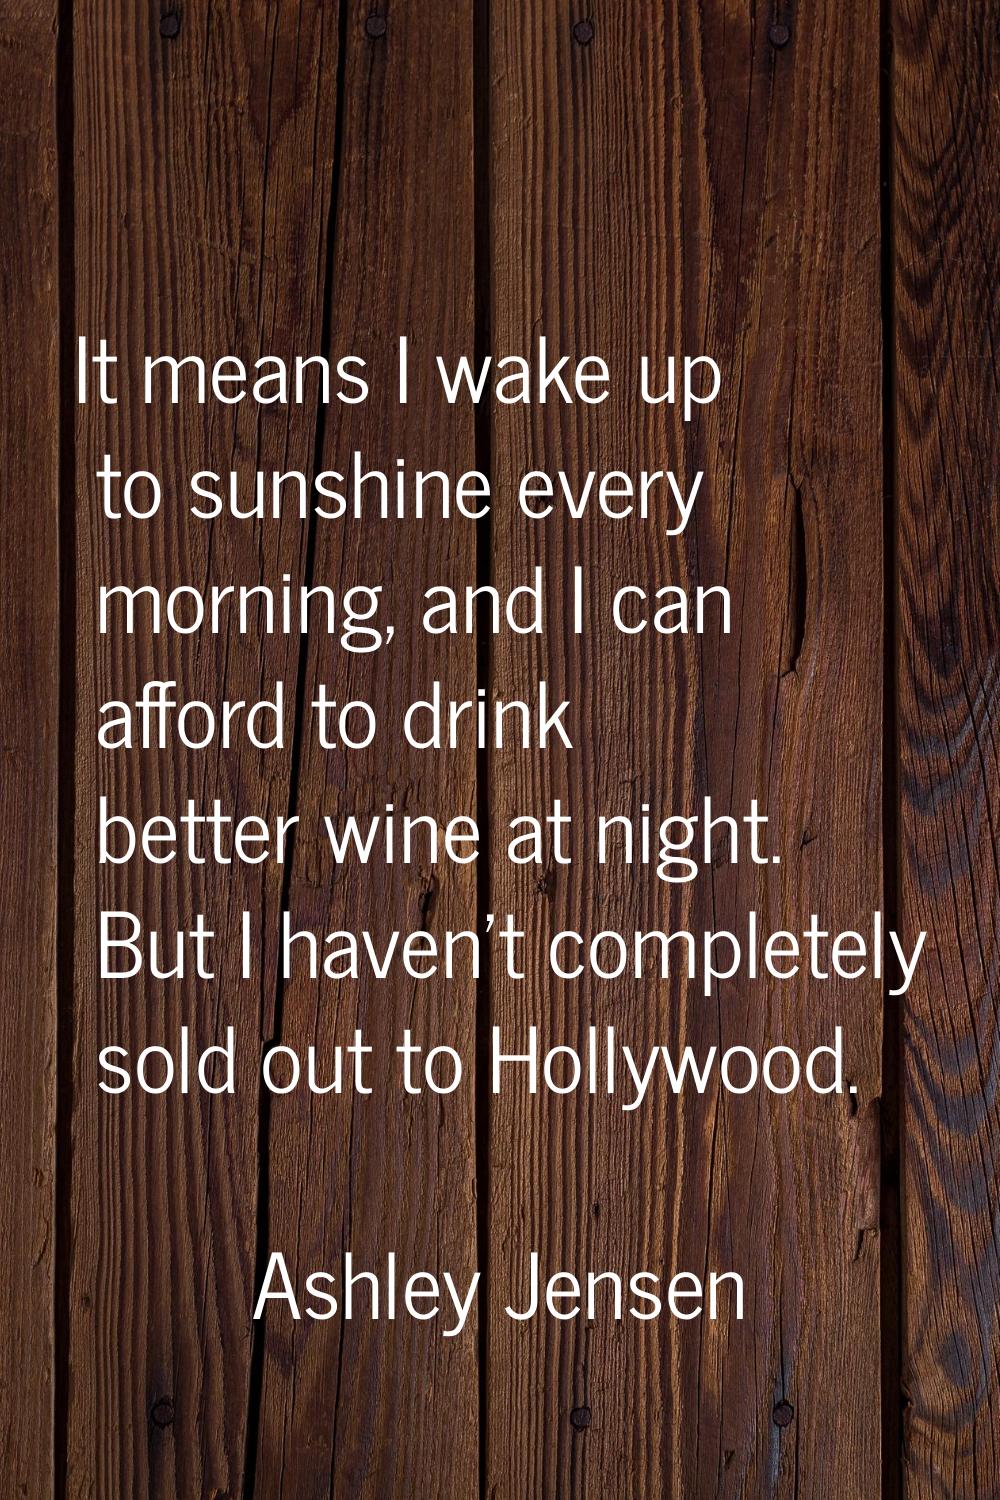 It means I wake up to sunshine every morning, and I can afford to drink better wine at night. But I